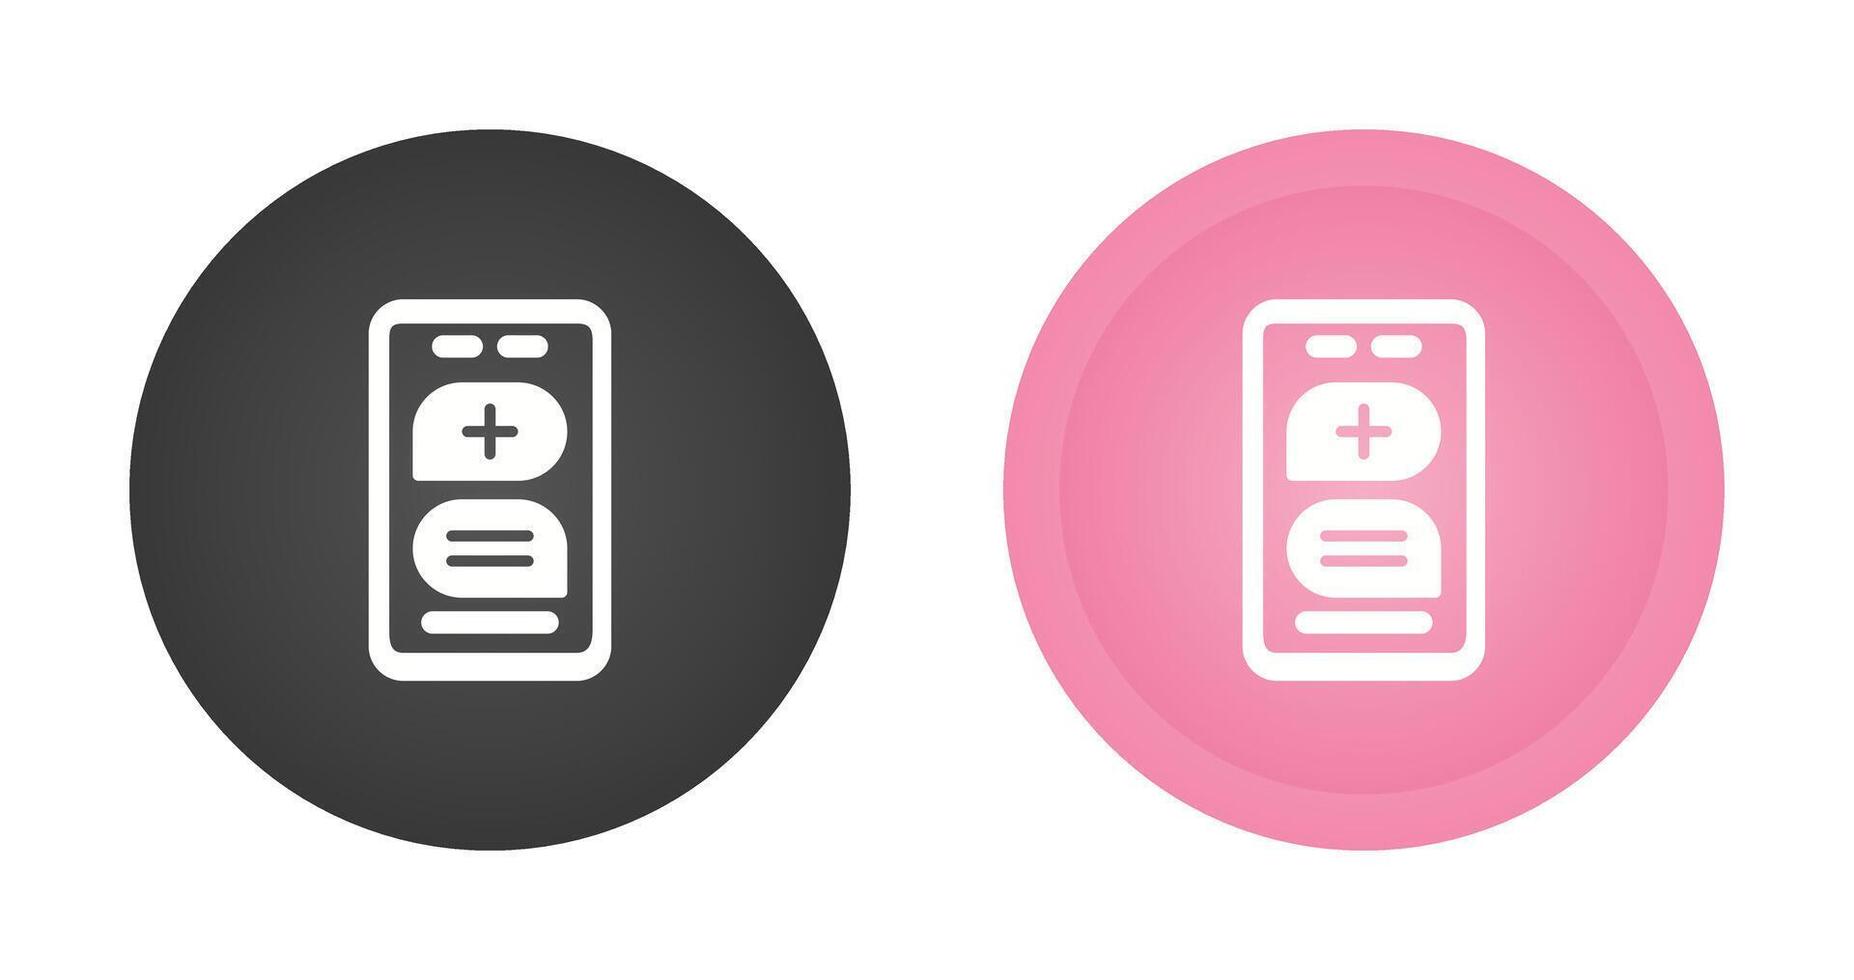 Online Appointment Vector Icon